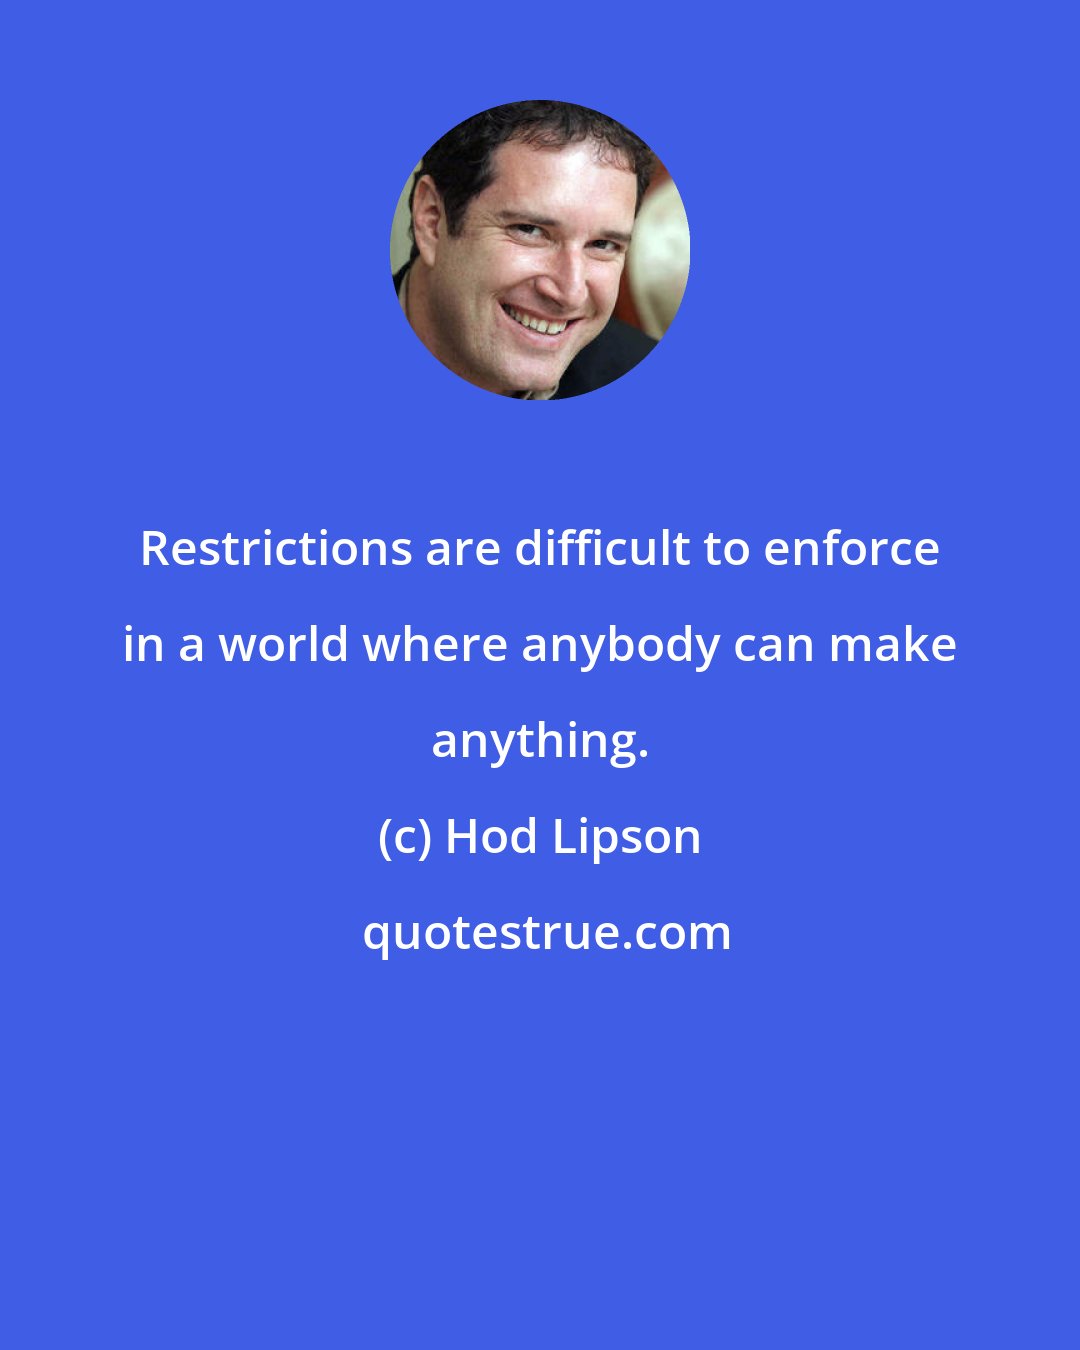 Hod Lipson: Restrictions are difficult to enforce in a world where anybody can make anything.